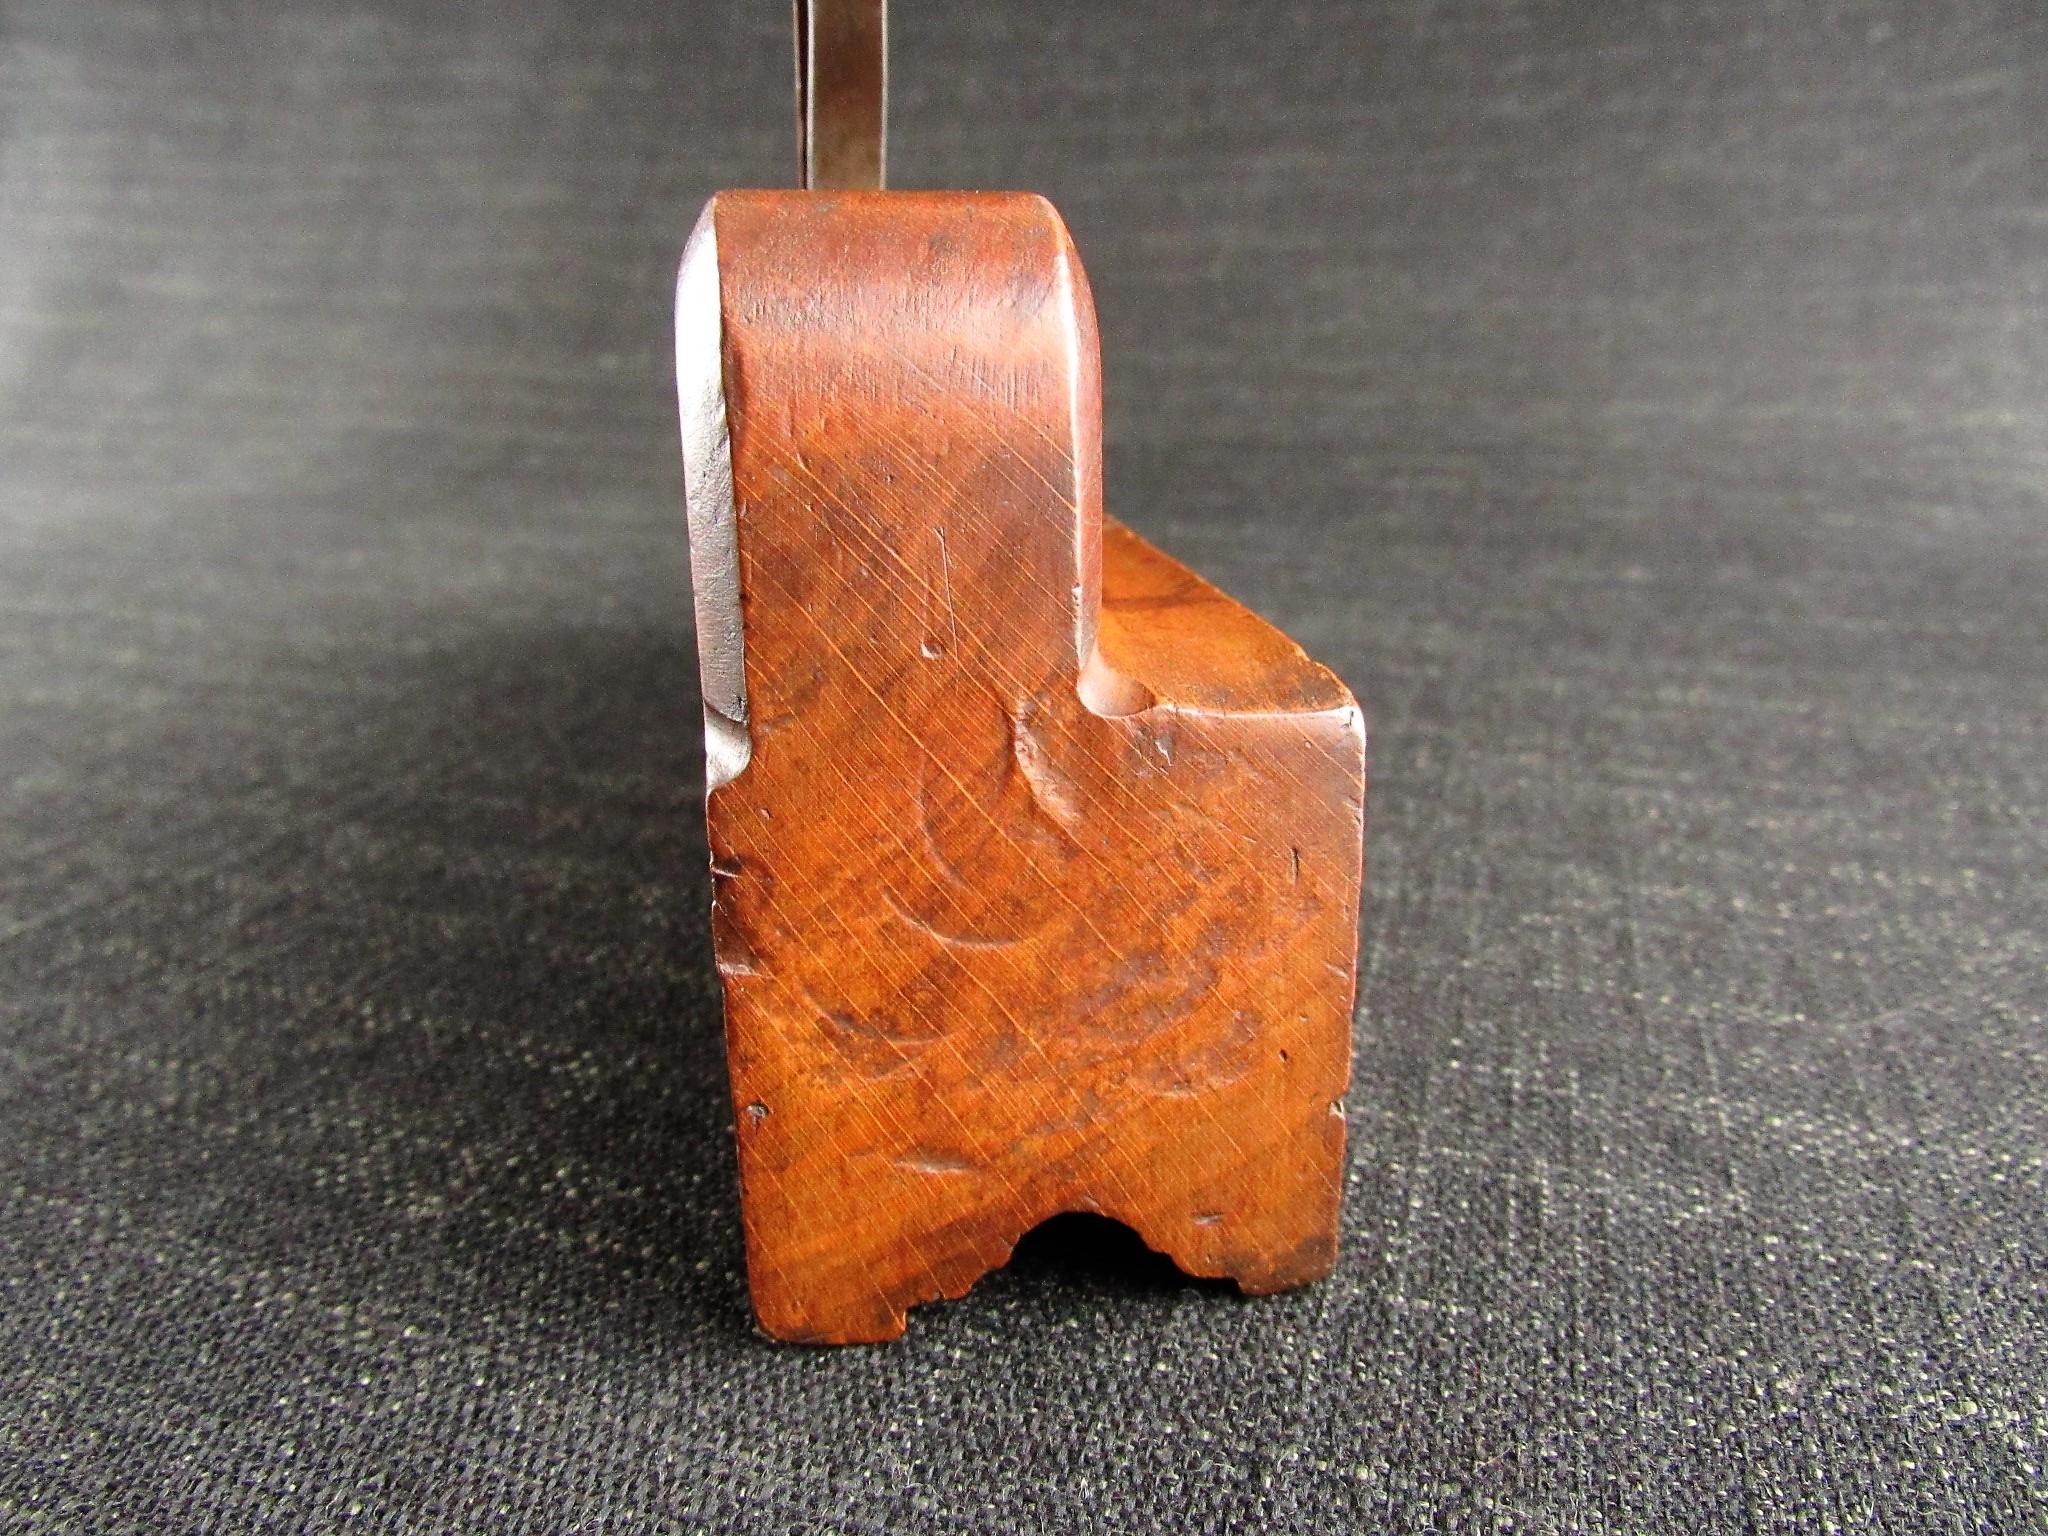 A Rare Complex Profile Moulding Plane by BUCK - Astragal & Hollow Single Iron Sash Plane